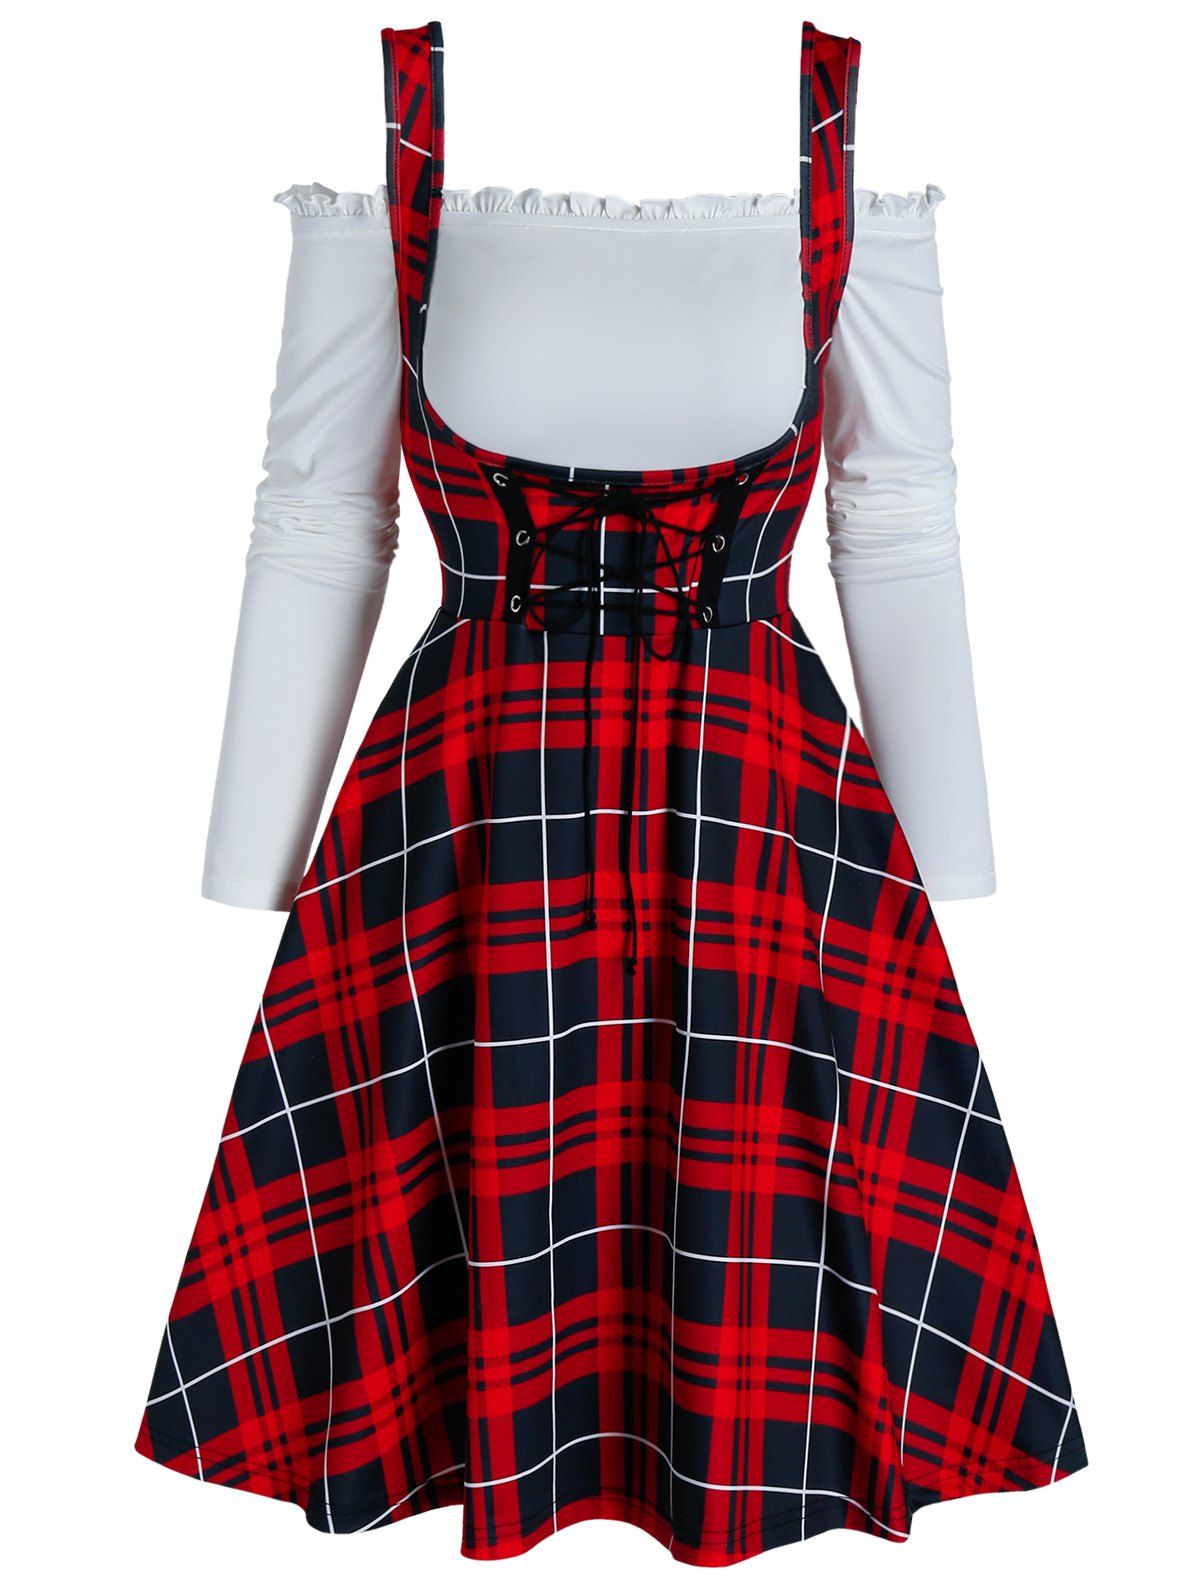 Checked Plaid Corset Style Lace Up A Line Mini Dress and Off Shoulder Ruched Top Set - RED WINE 3XL